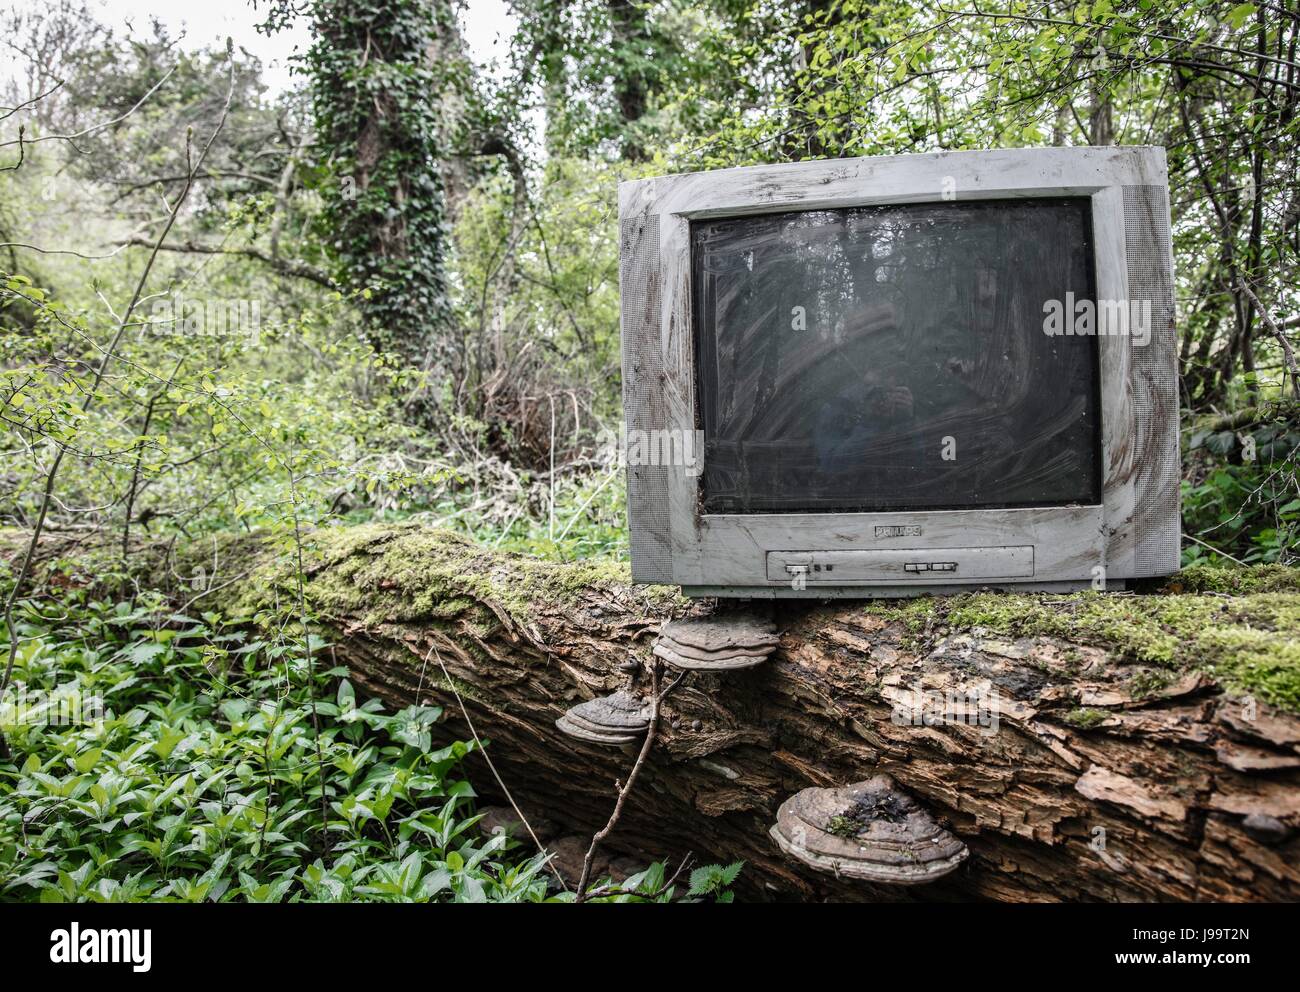 TV dumped in a forest Stock Photo